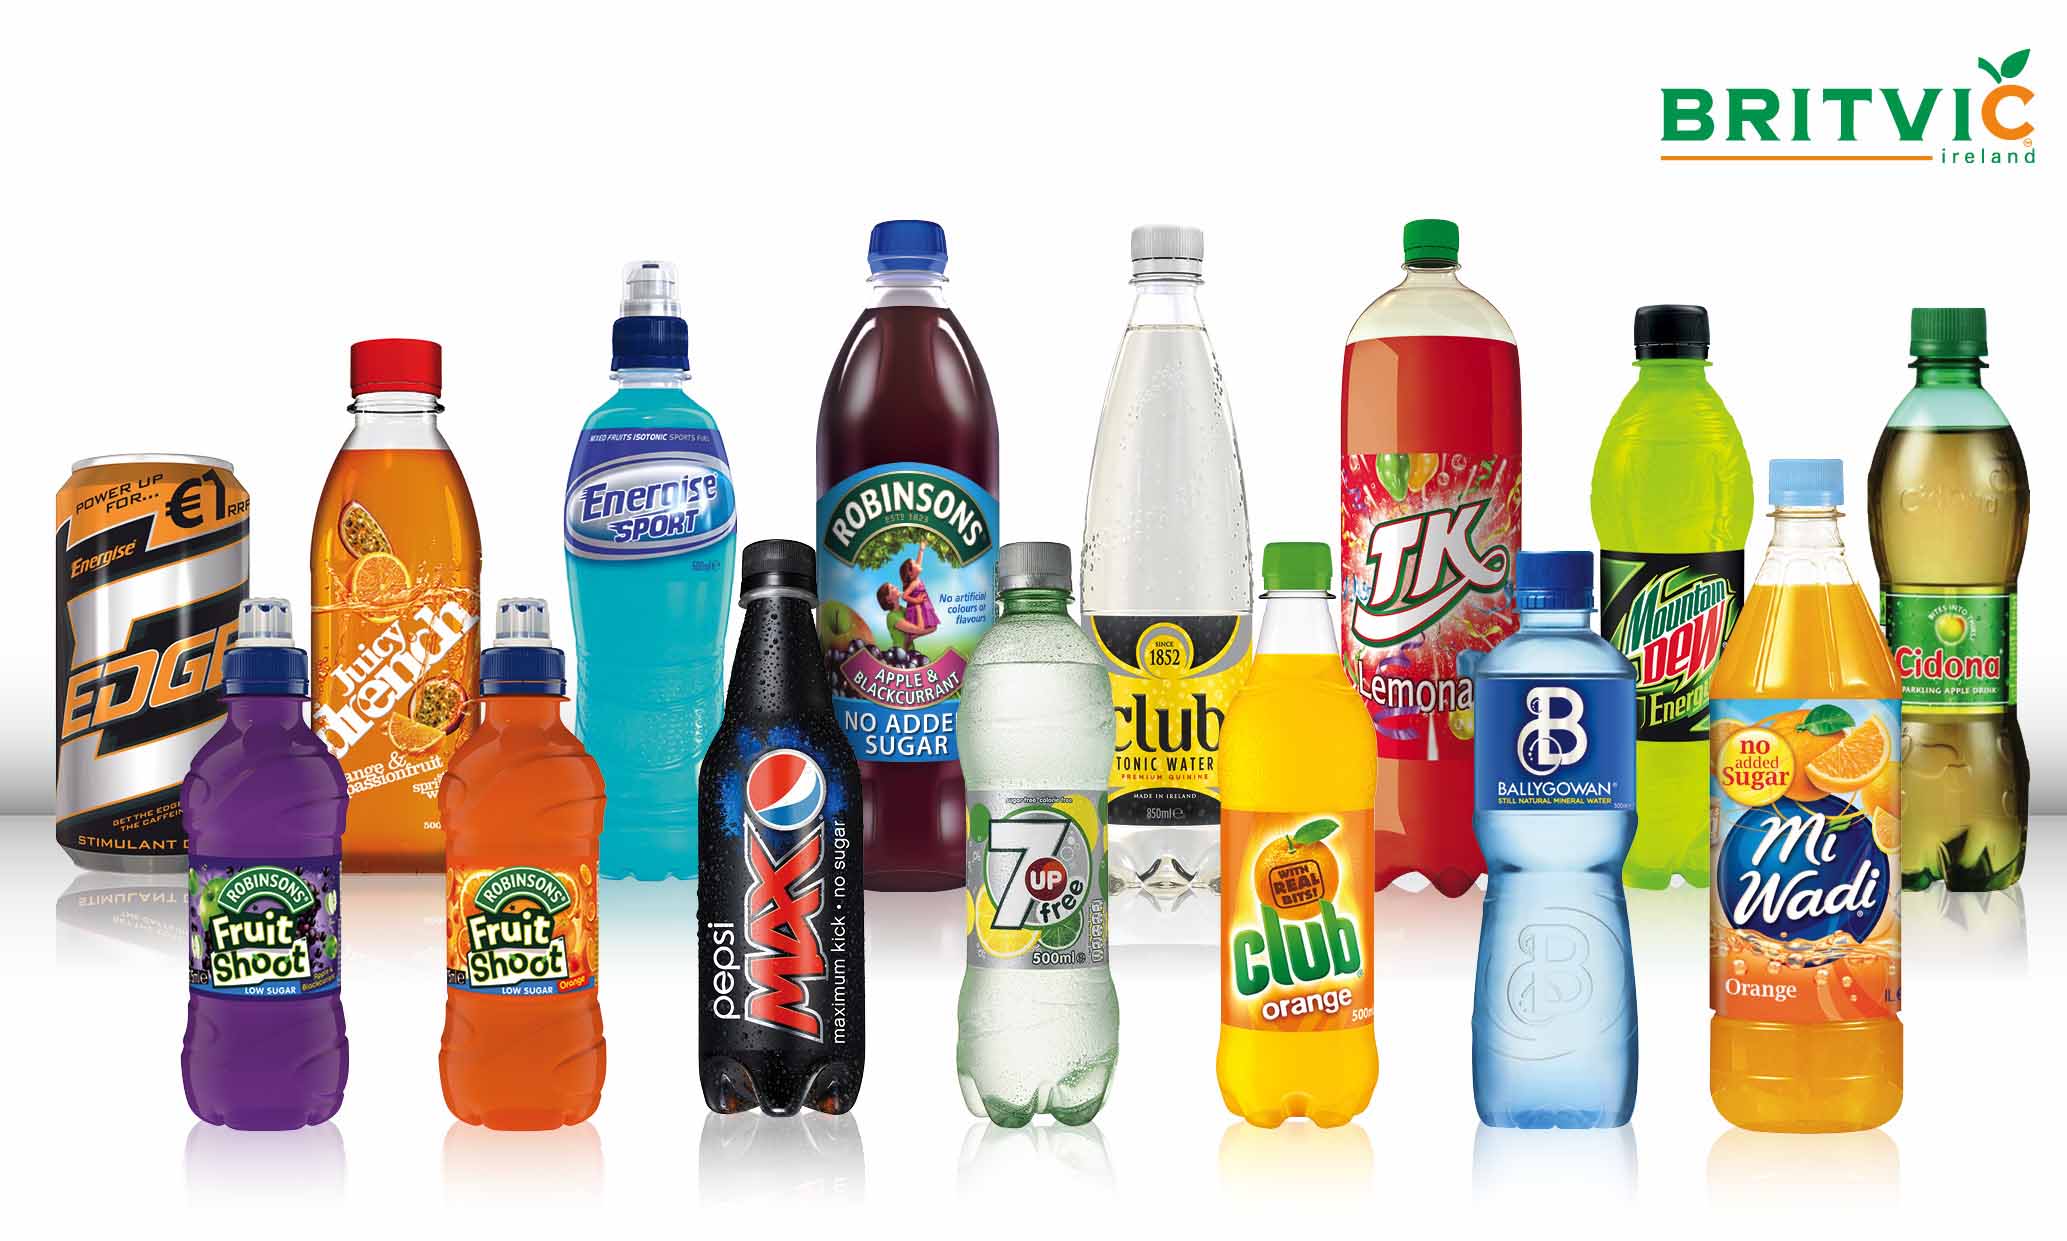 Revenues at Britvic Ireland grew 4.6% to €102.55 million (£90.6m) in the 28 weeks to the 14th April 2019 from £86.6 million in the same period in 2018 according to Britvic plc’s Interim Results, published recently.